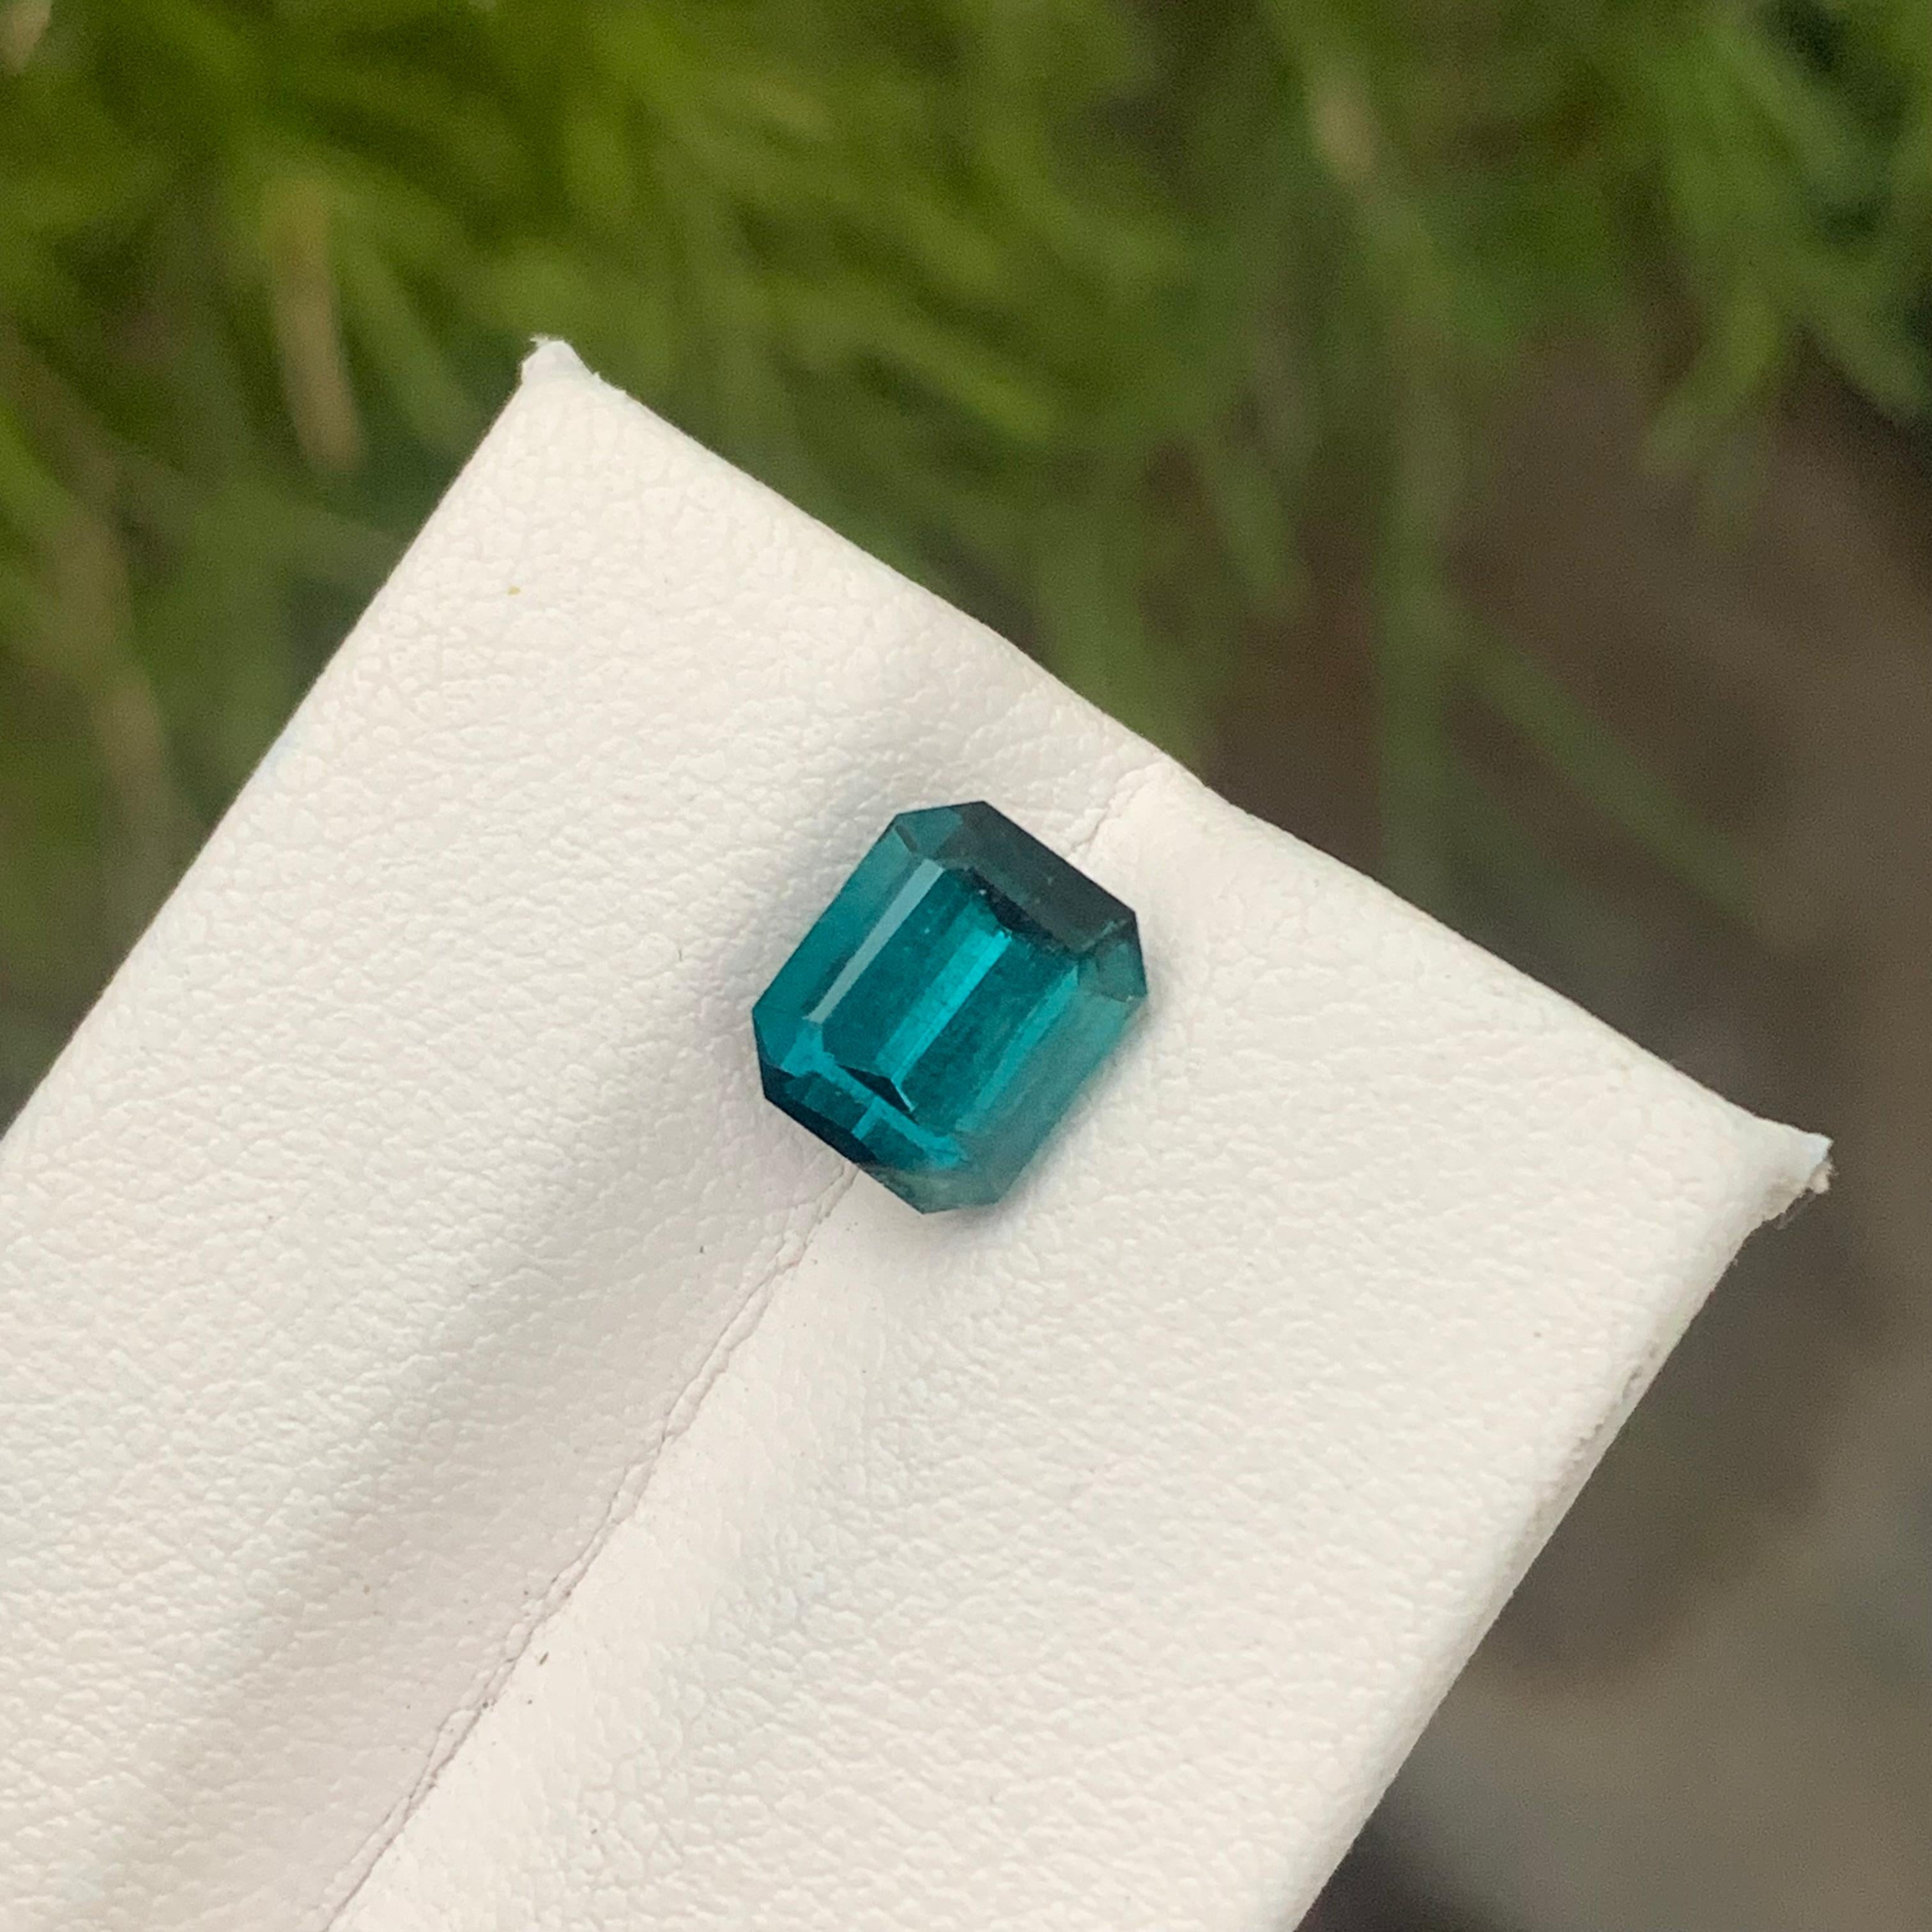 2.75 Carat Included Natural Loose Indicolite Tourmaline Emerald Cut Ring Gem For Sale 4